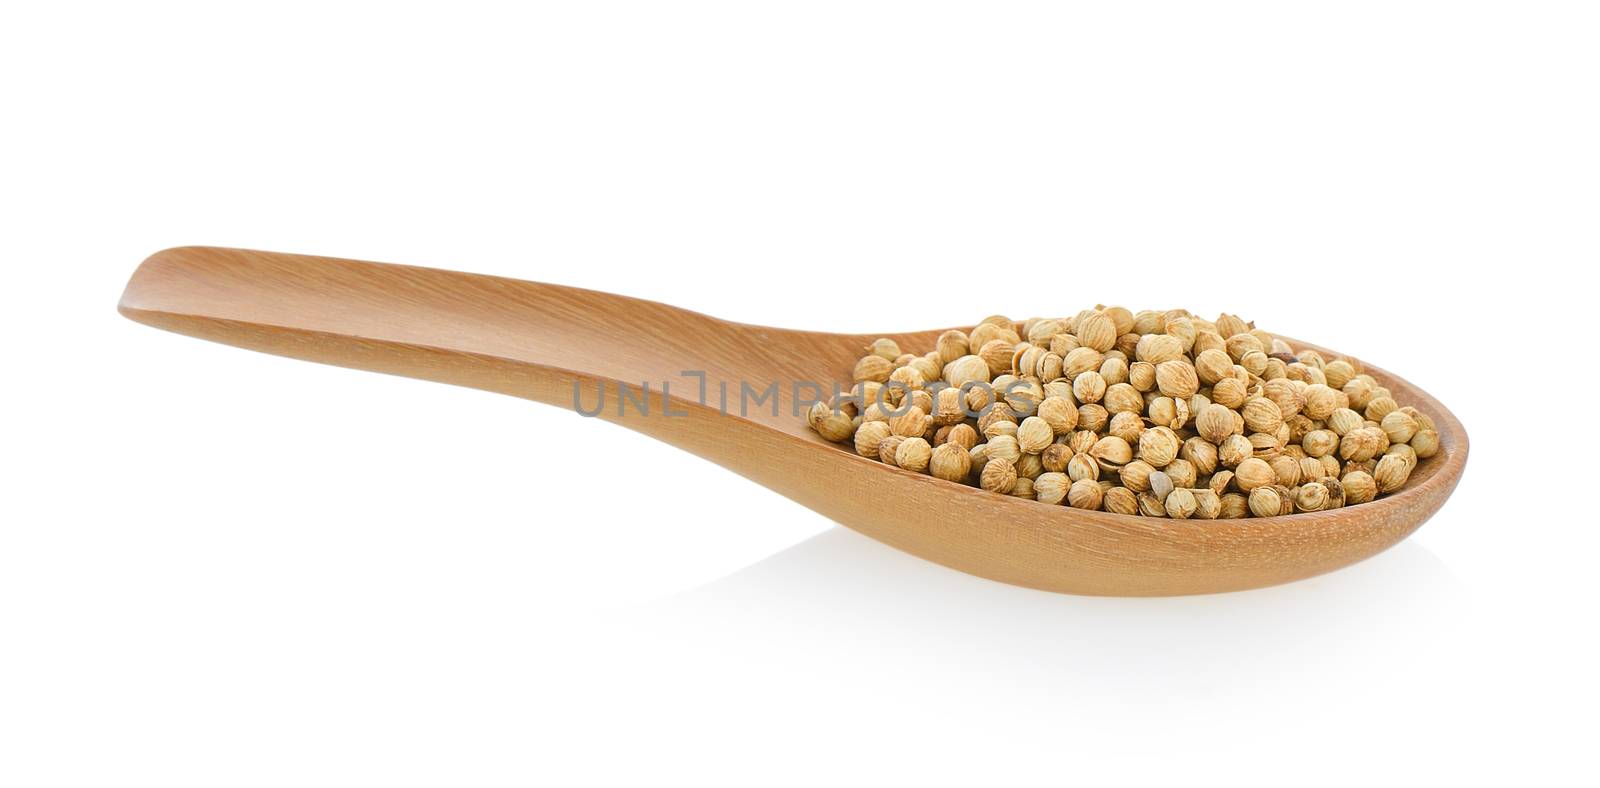 Coriander seeds in wood spoon on white background by sommai